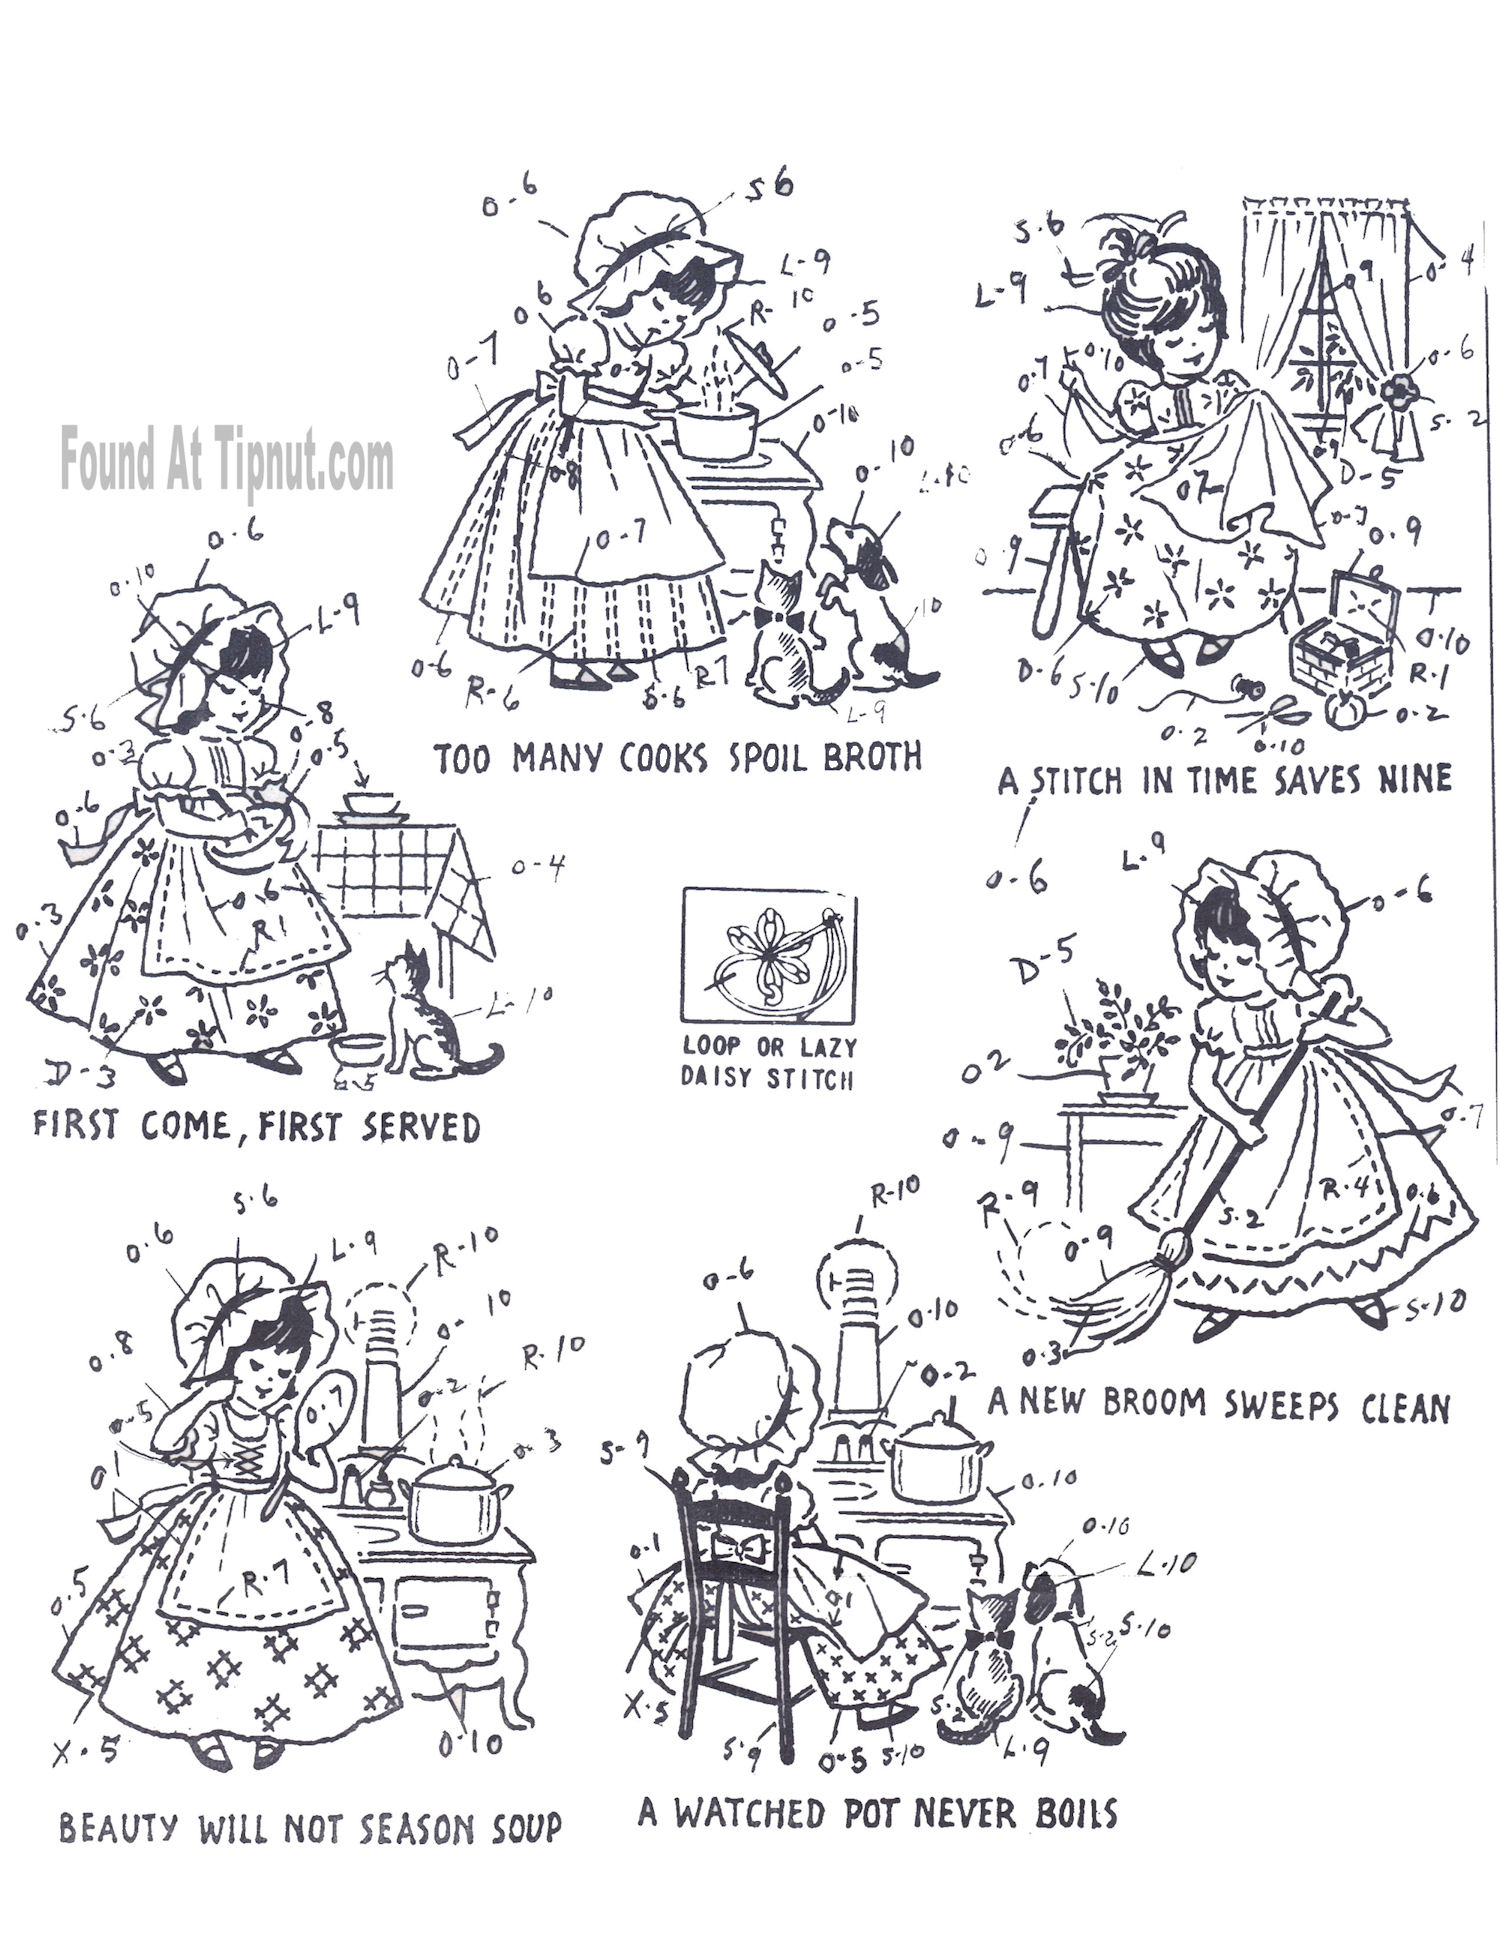 Retro Embroidery Patterns Kitchen Proverbs Embroidery Patterns Complete Set Tipnut